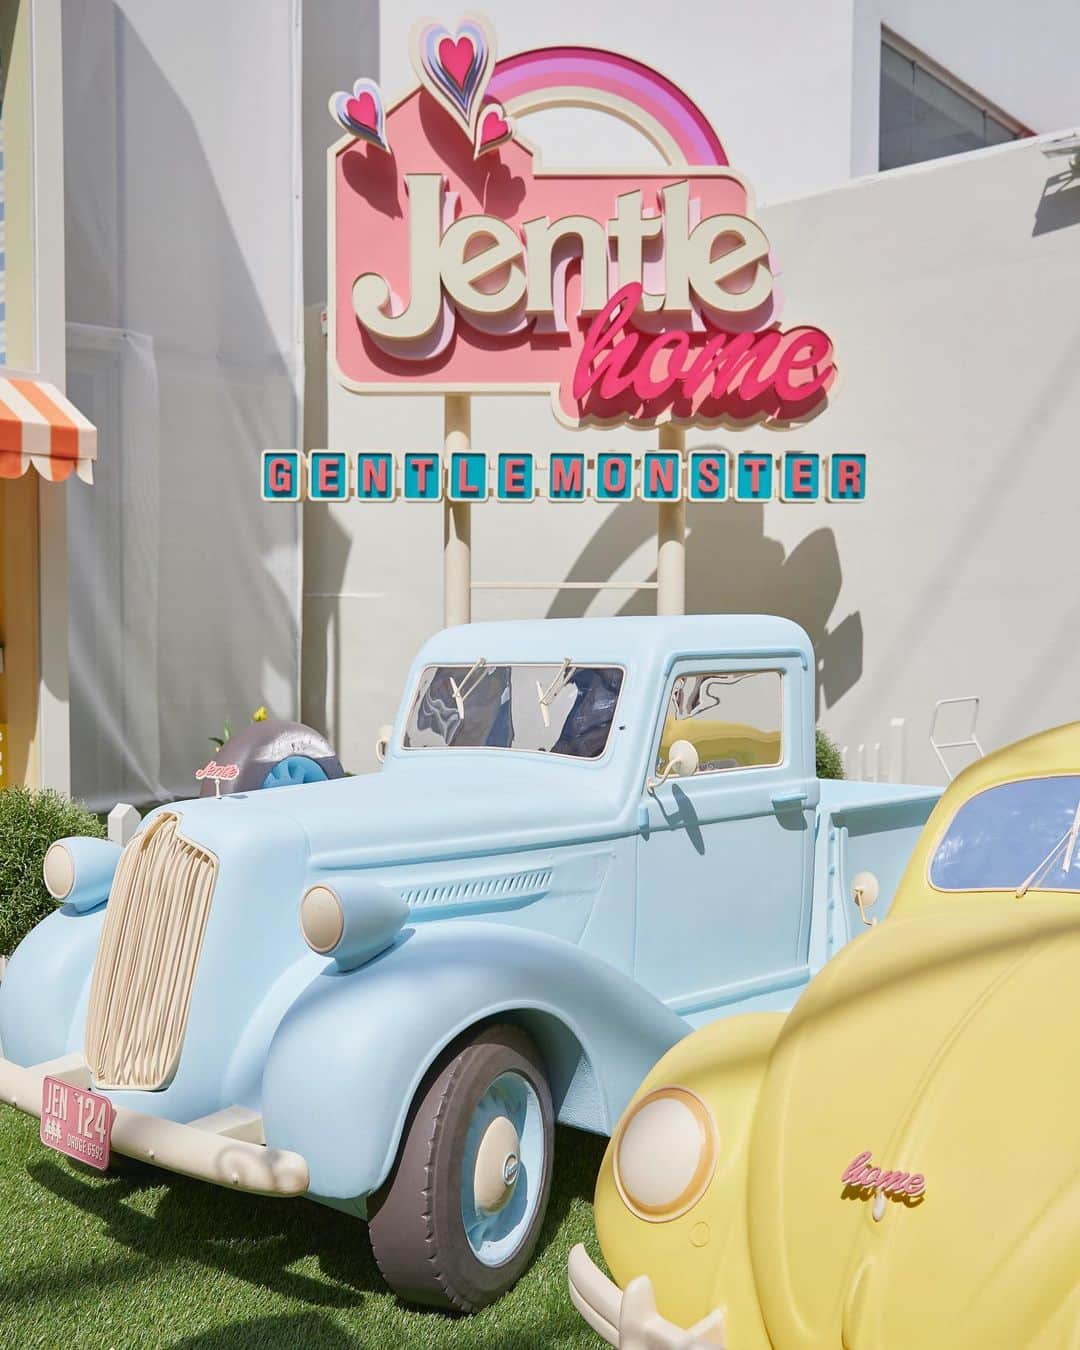 GENTLE MONSTERさんのインスタグラム写真 - (GENTLE MONSTERInstagram)「[Welcome to JENTLE HOME] Visit ‘JENTLE HOME' on May 13, where the magnificent world unfolds, created by Gentle Monster and BlackPink ‘Jennie’. Jennie's childhood memories will take us back to her dollhouse, to her nostalgic fantasy world. ⠀ Address: 22 Apgujeong-ro 10-gil, Sinsa-dong, Gangnam-gu, Seoul, South Korea Date: May 13th 2020 – September 12th 2020 Time: 12:00PM – 9:00PM ⠀ * Due to Coronavirus (COVID-19), this space requires all visitors to wear masks to prevent the further spread of the COVID-19 and secure safety for visitors. Space entry is restricted for those who do not wear masks and those who have a high fever of more than 37.5 degrees. Before entering the space, there will be a safety procedure including measuring the body temperature and sanitizing hands. ⠀ 젠틀몬스터와 블랙핑크 제니가 함께 꿈꾼 판타지 세계를 구현한 ‘JENTLE HOME’을 소개합니다. 5월 13일, 어릴 적 향수를 느끼게 하는 인형의 집을 모티브로 한 젠틀몬스터의 판타지가 펼쳐 지는 ‘젠틀 홈’을 방문해 보세요. ⠀ 장소: 서울특별시 강남구 압구정로 10길 22 운영 기간: 2020년 5월 13일 - 9월 12일 운영 시간: 12:00 - 21:00 ⠀ * 코로나바이러스 감염증-19 확산 예방을 위하여 본 공간은 모든 방문객의 마스크 착용을 의무화하고 있습니다. 마스크 미착용자 및 37.5도 이상 고열이 있으신 분들은 공간 입장이 제한됩니다. 공간 입장 전, 마스크 착용 점검 및 체온 측정, 손 소독 등을 진행합니다. 공간 내부에서도 관람객 간 생활속 거리를 유지하며 운영됩니다. #GentleMonsterxJennie #JentleHome #GentleMonster #Jennie #JentleHomeByJennie #JentleHomeIsHere」5月6日 18時52分 - gentlemonster